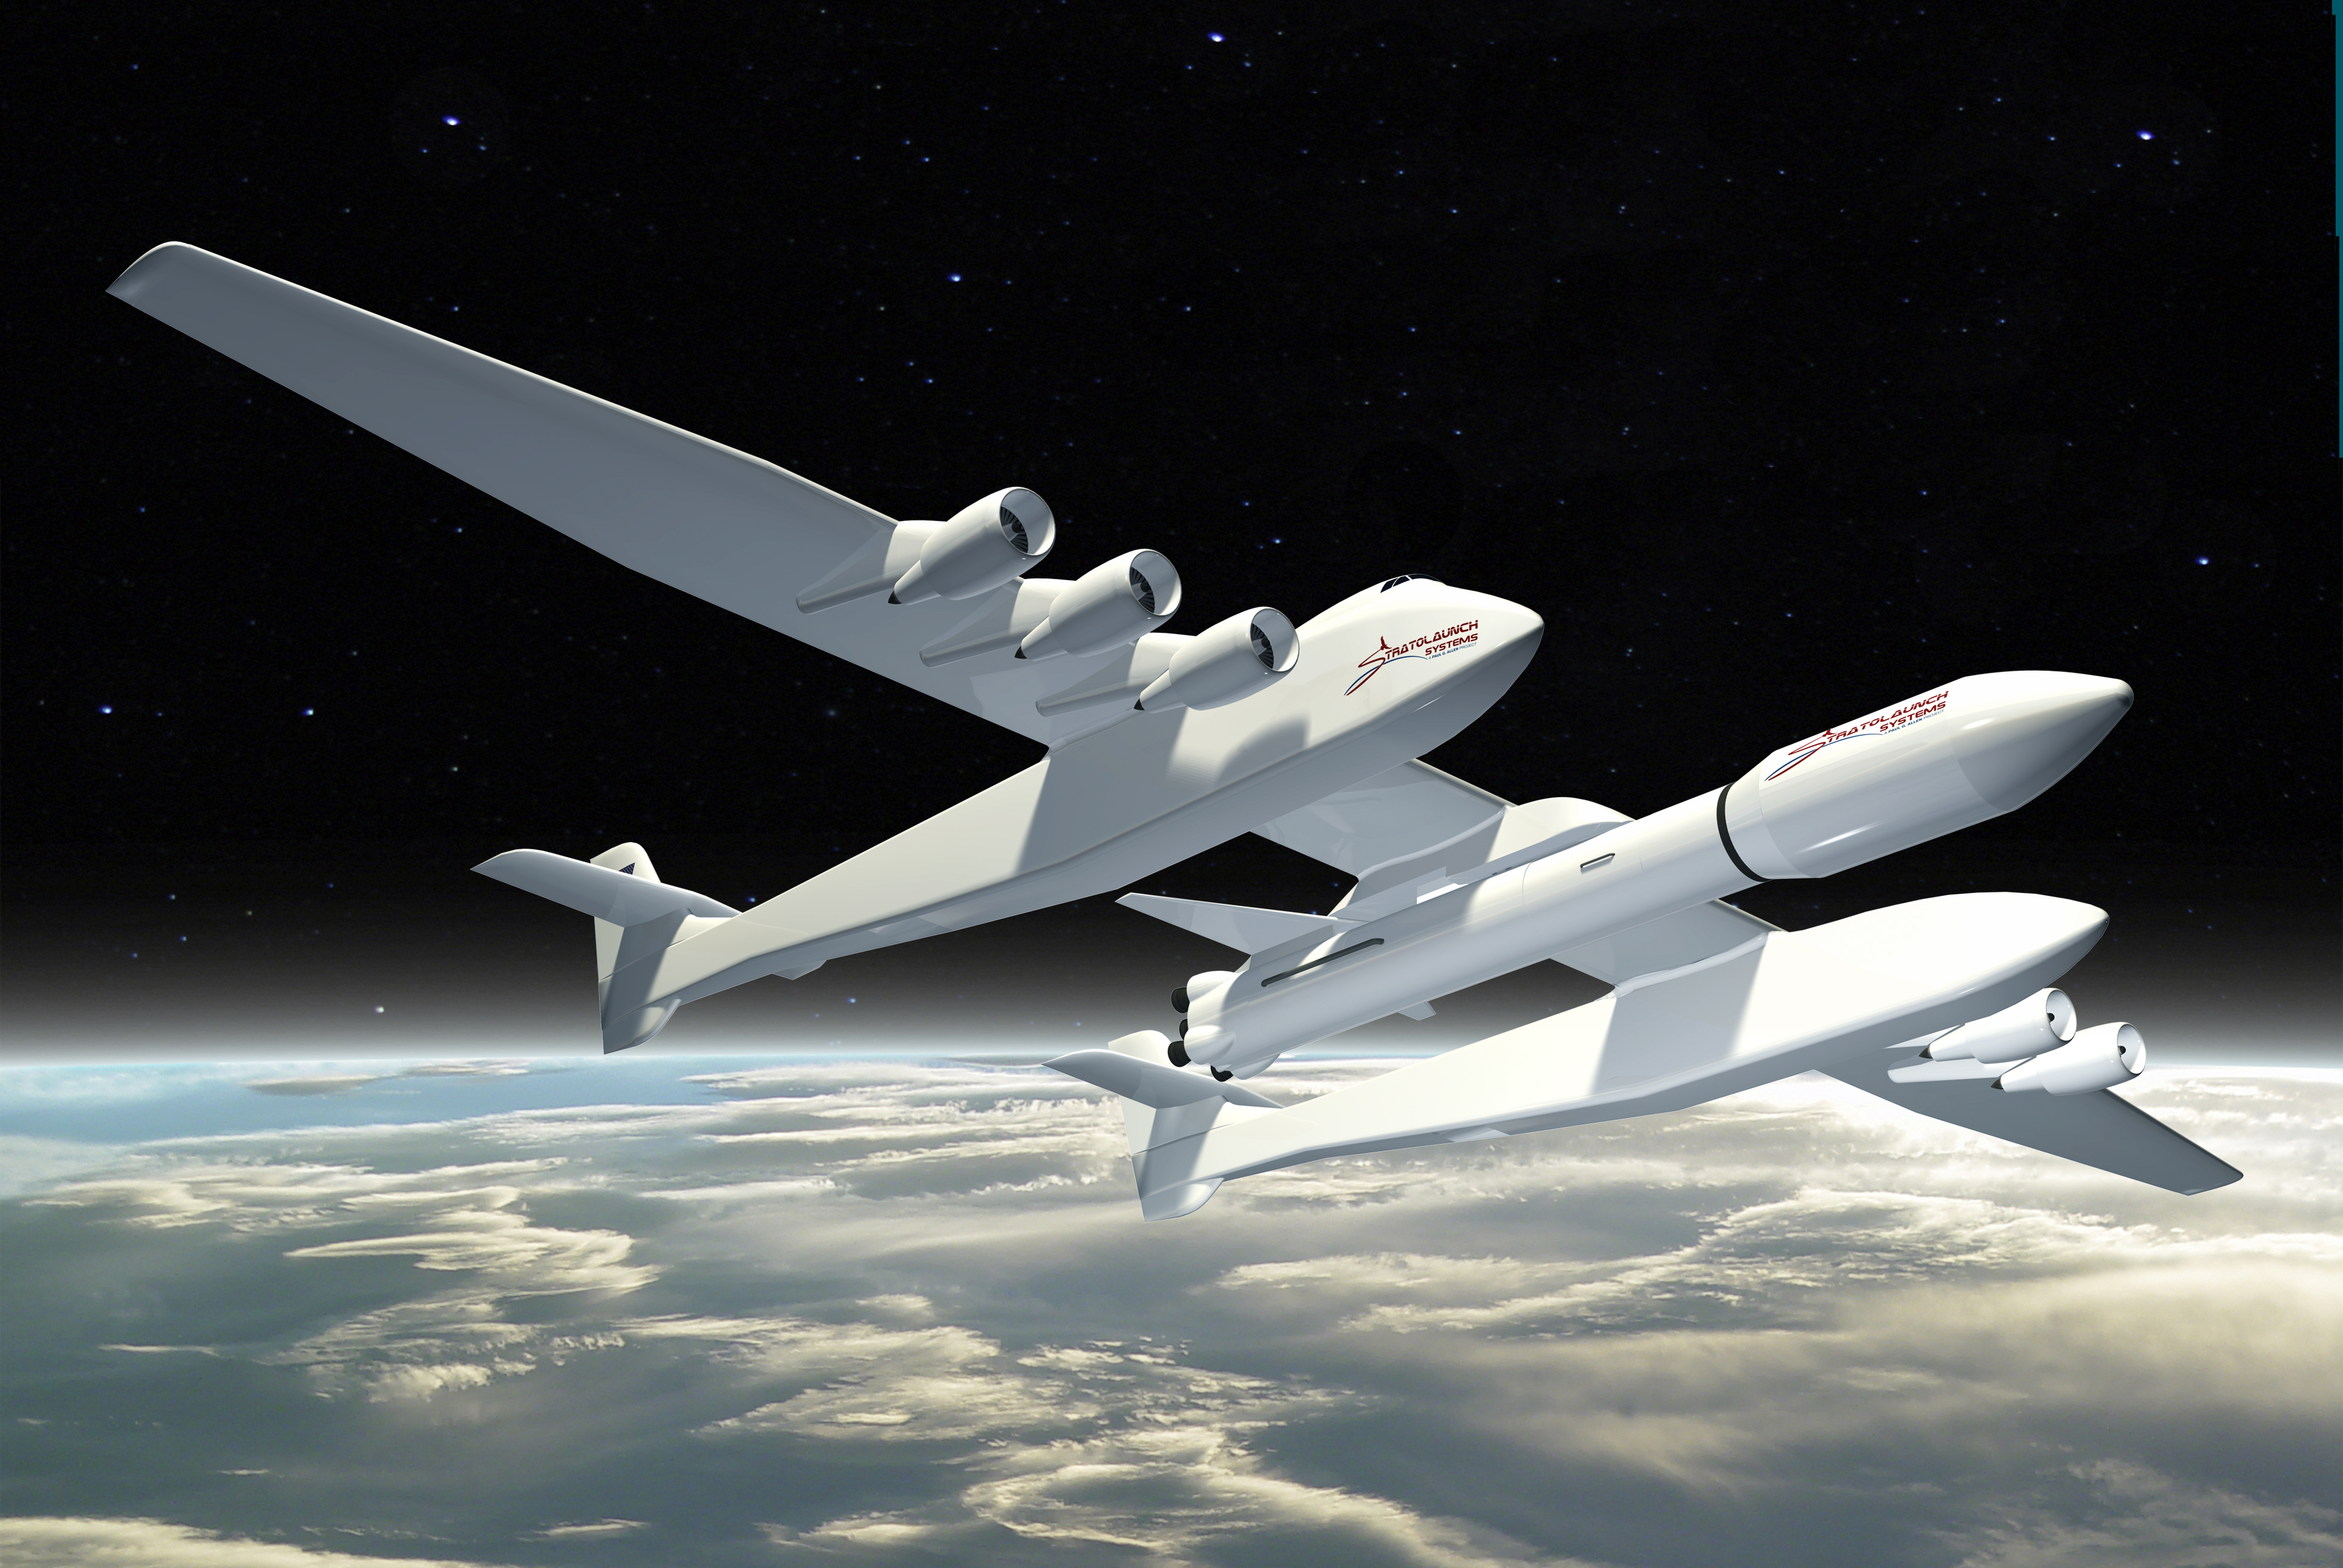 Rocket for Giant Satellite-Launching Stratolaunch Airplane Remains a Mystery